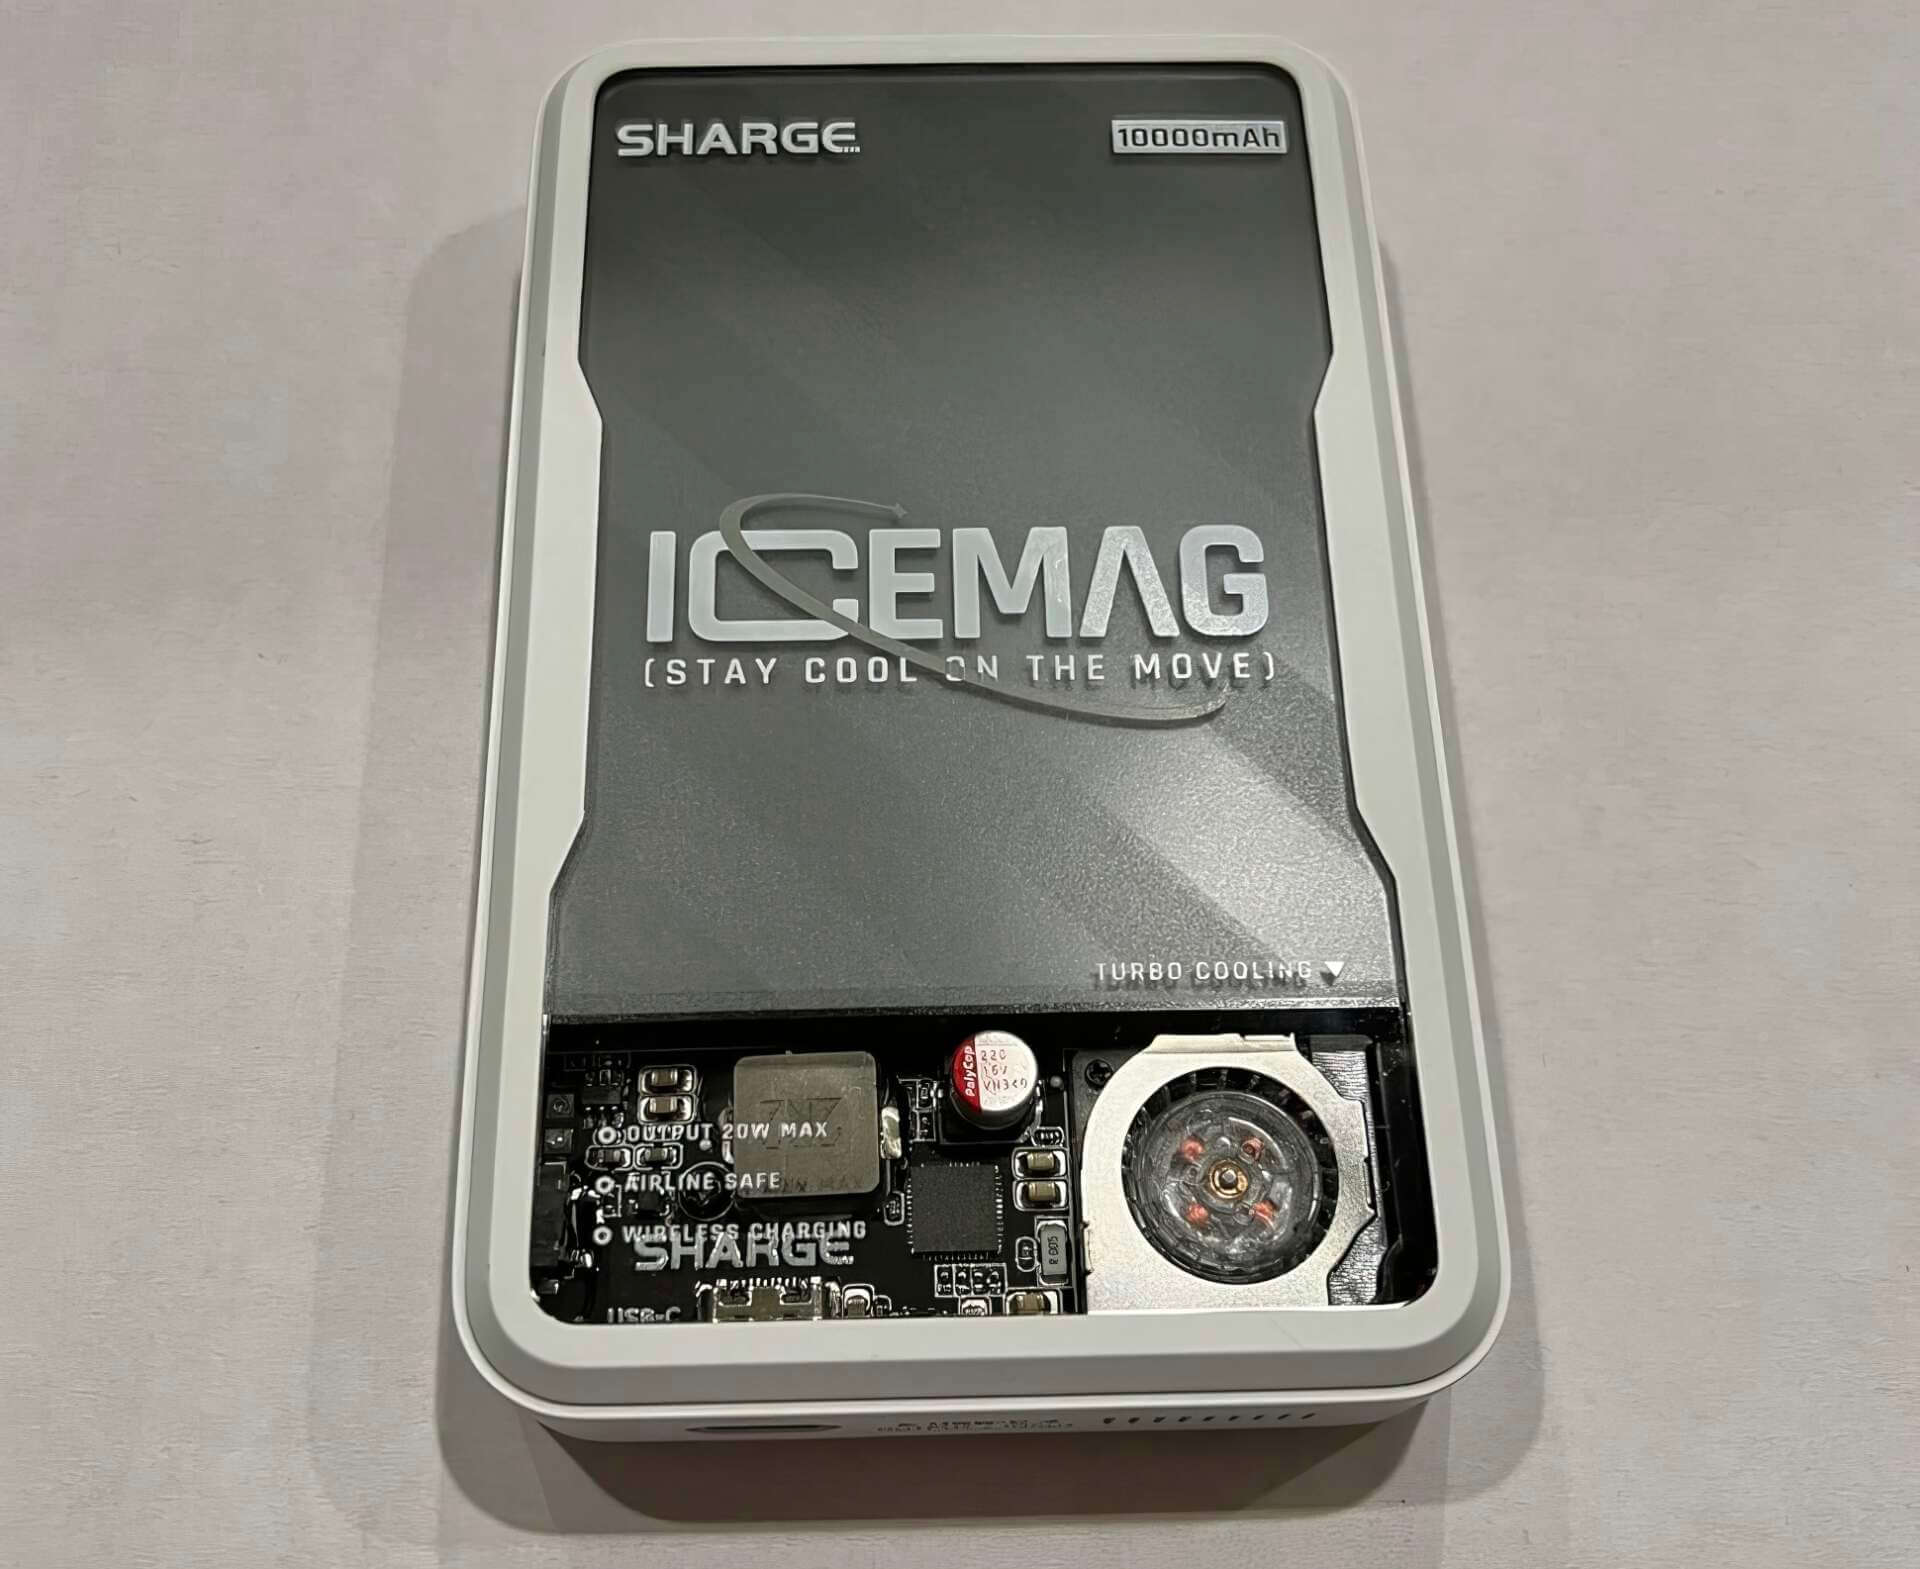 Sharge Icemag Magnetic Power Bank View